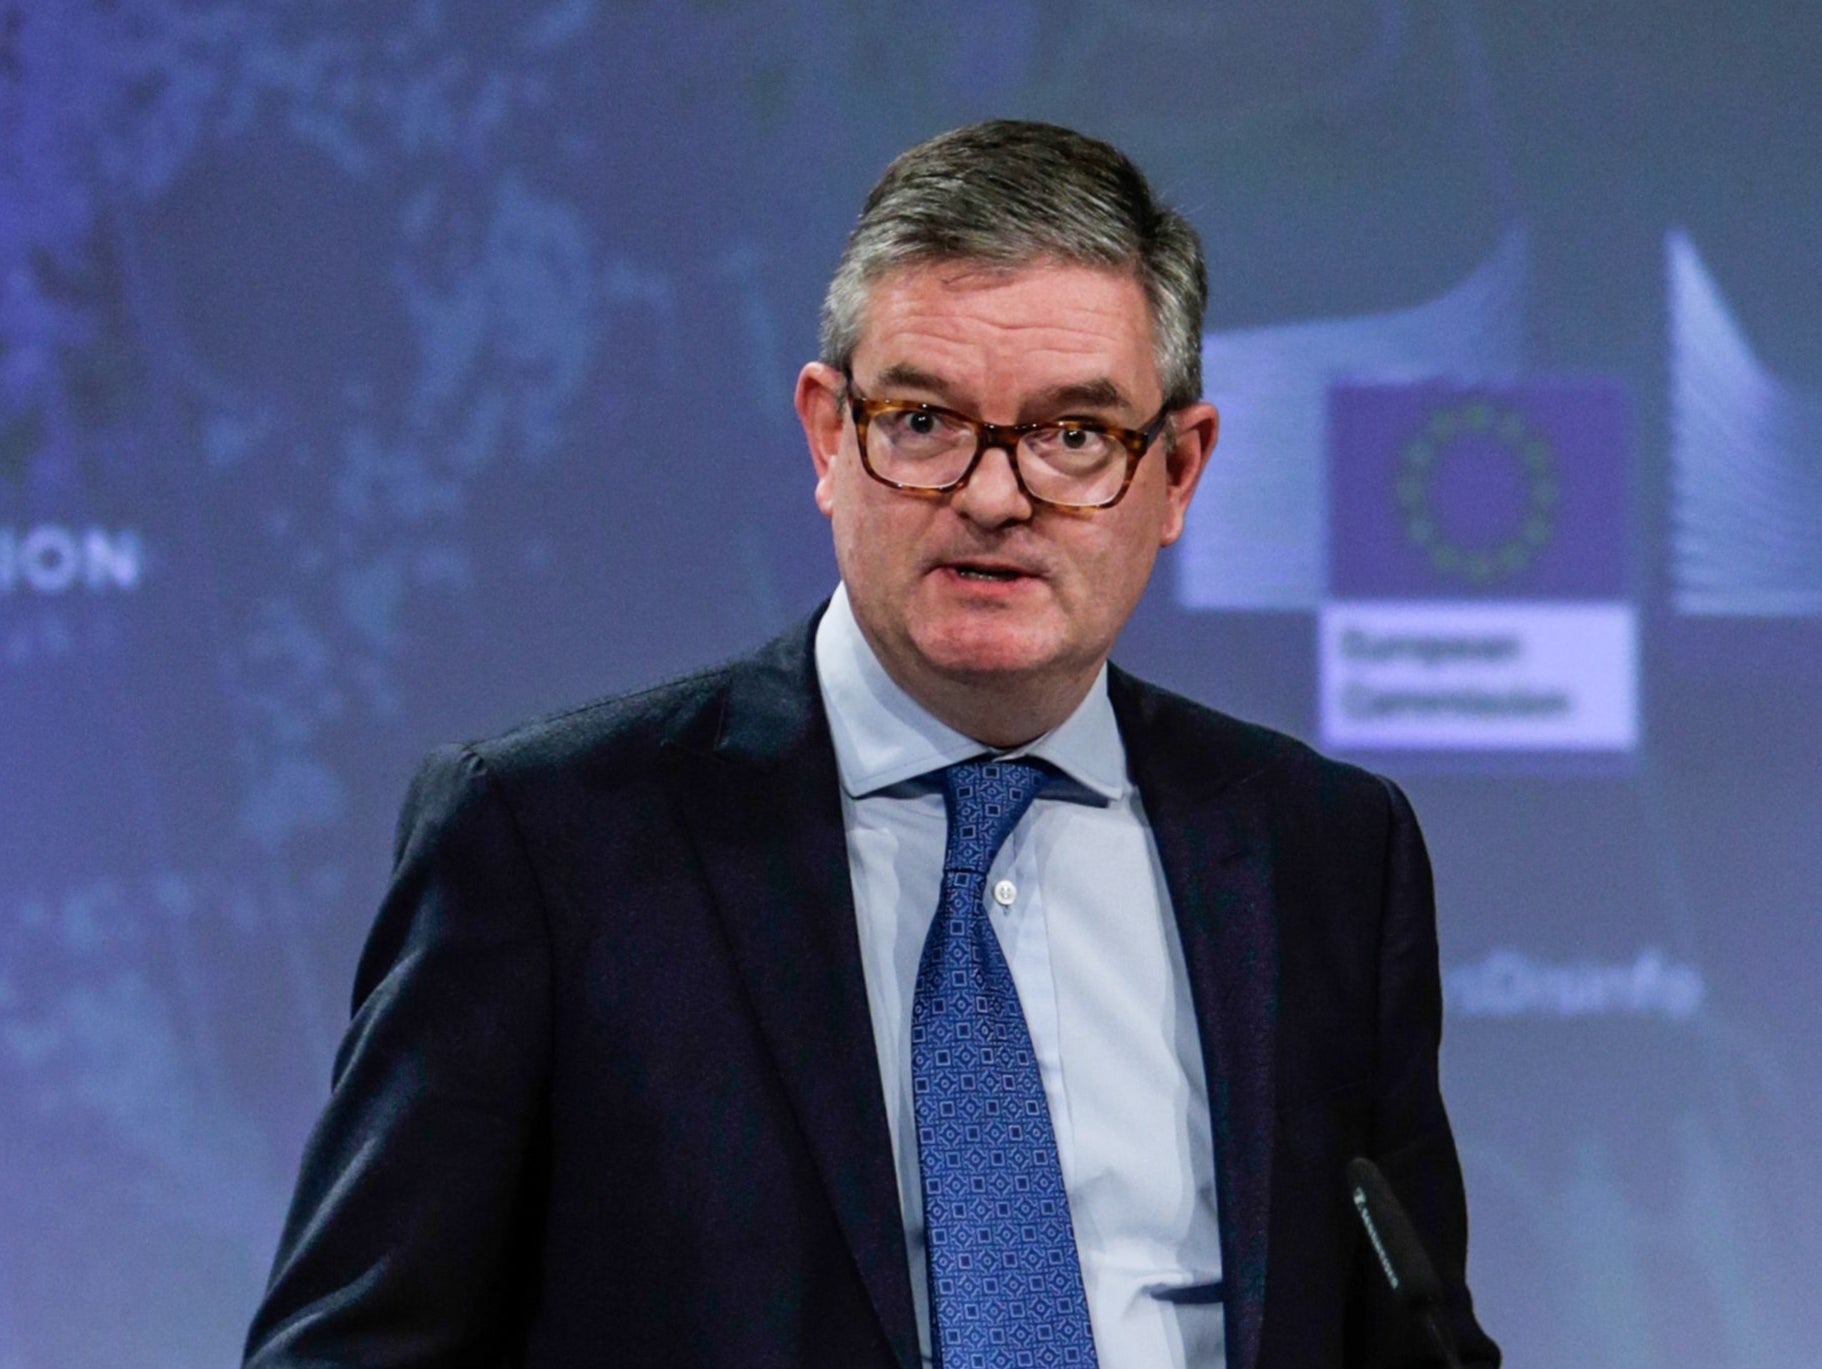 Sir Julian King has warned a no-deal Brexit would lead to unavoidable and severe security problems